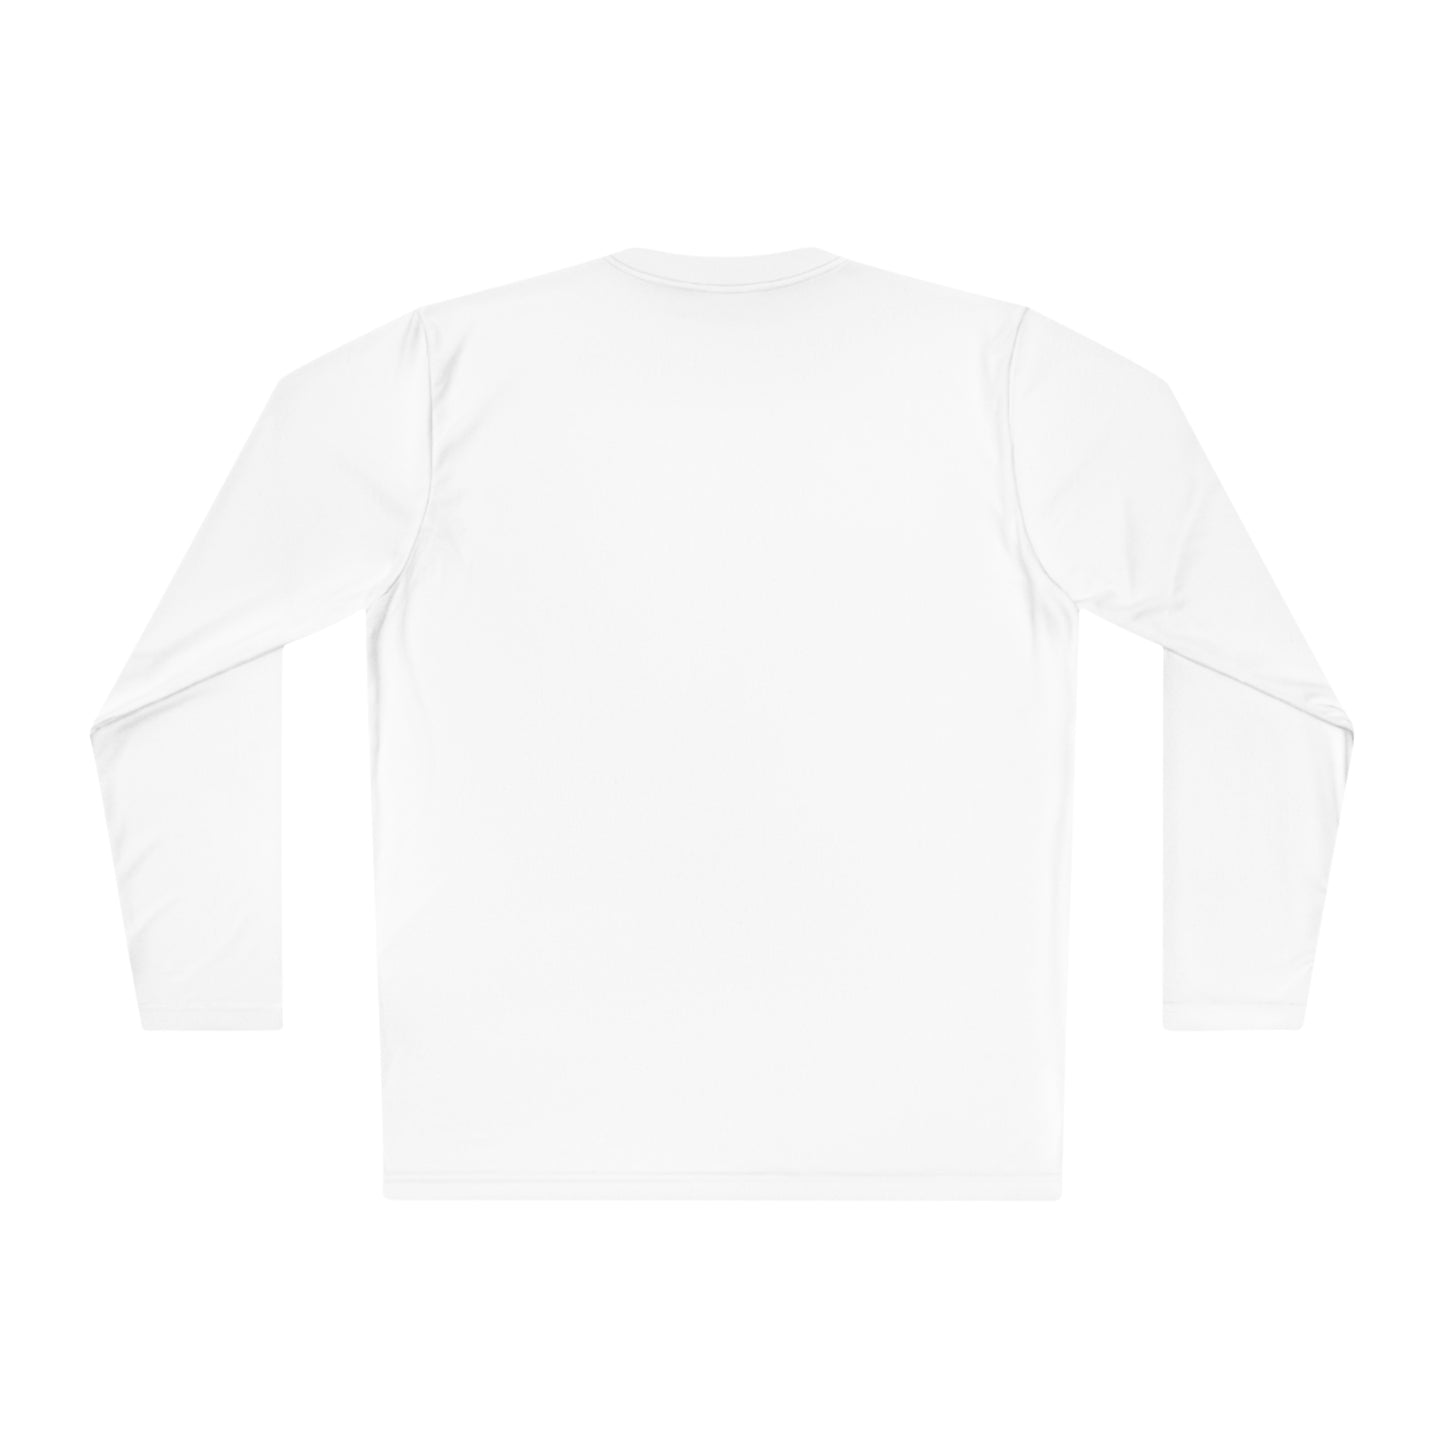 Performance Long Sleeve - The Release